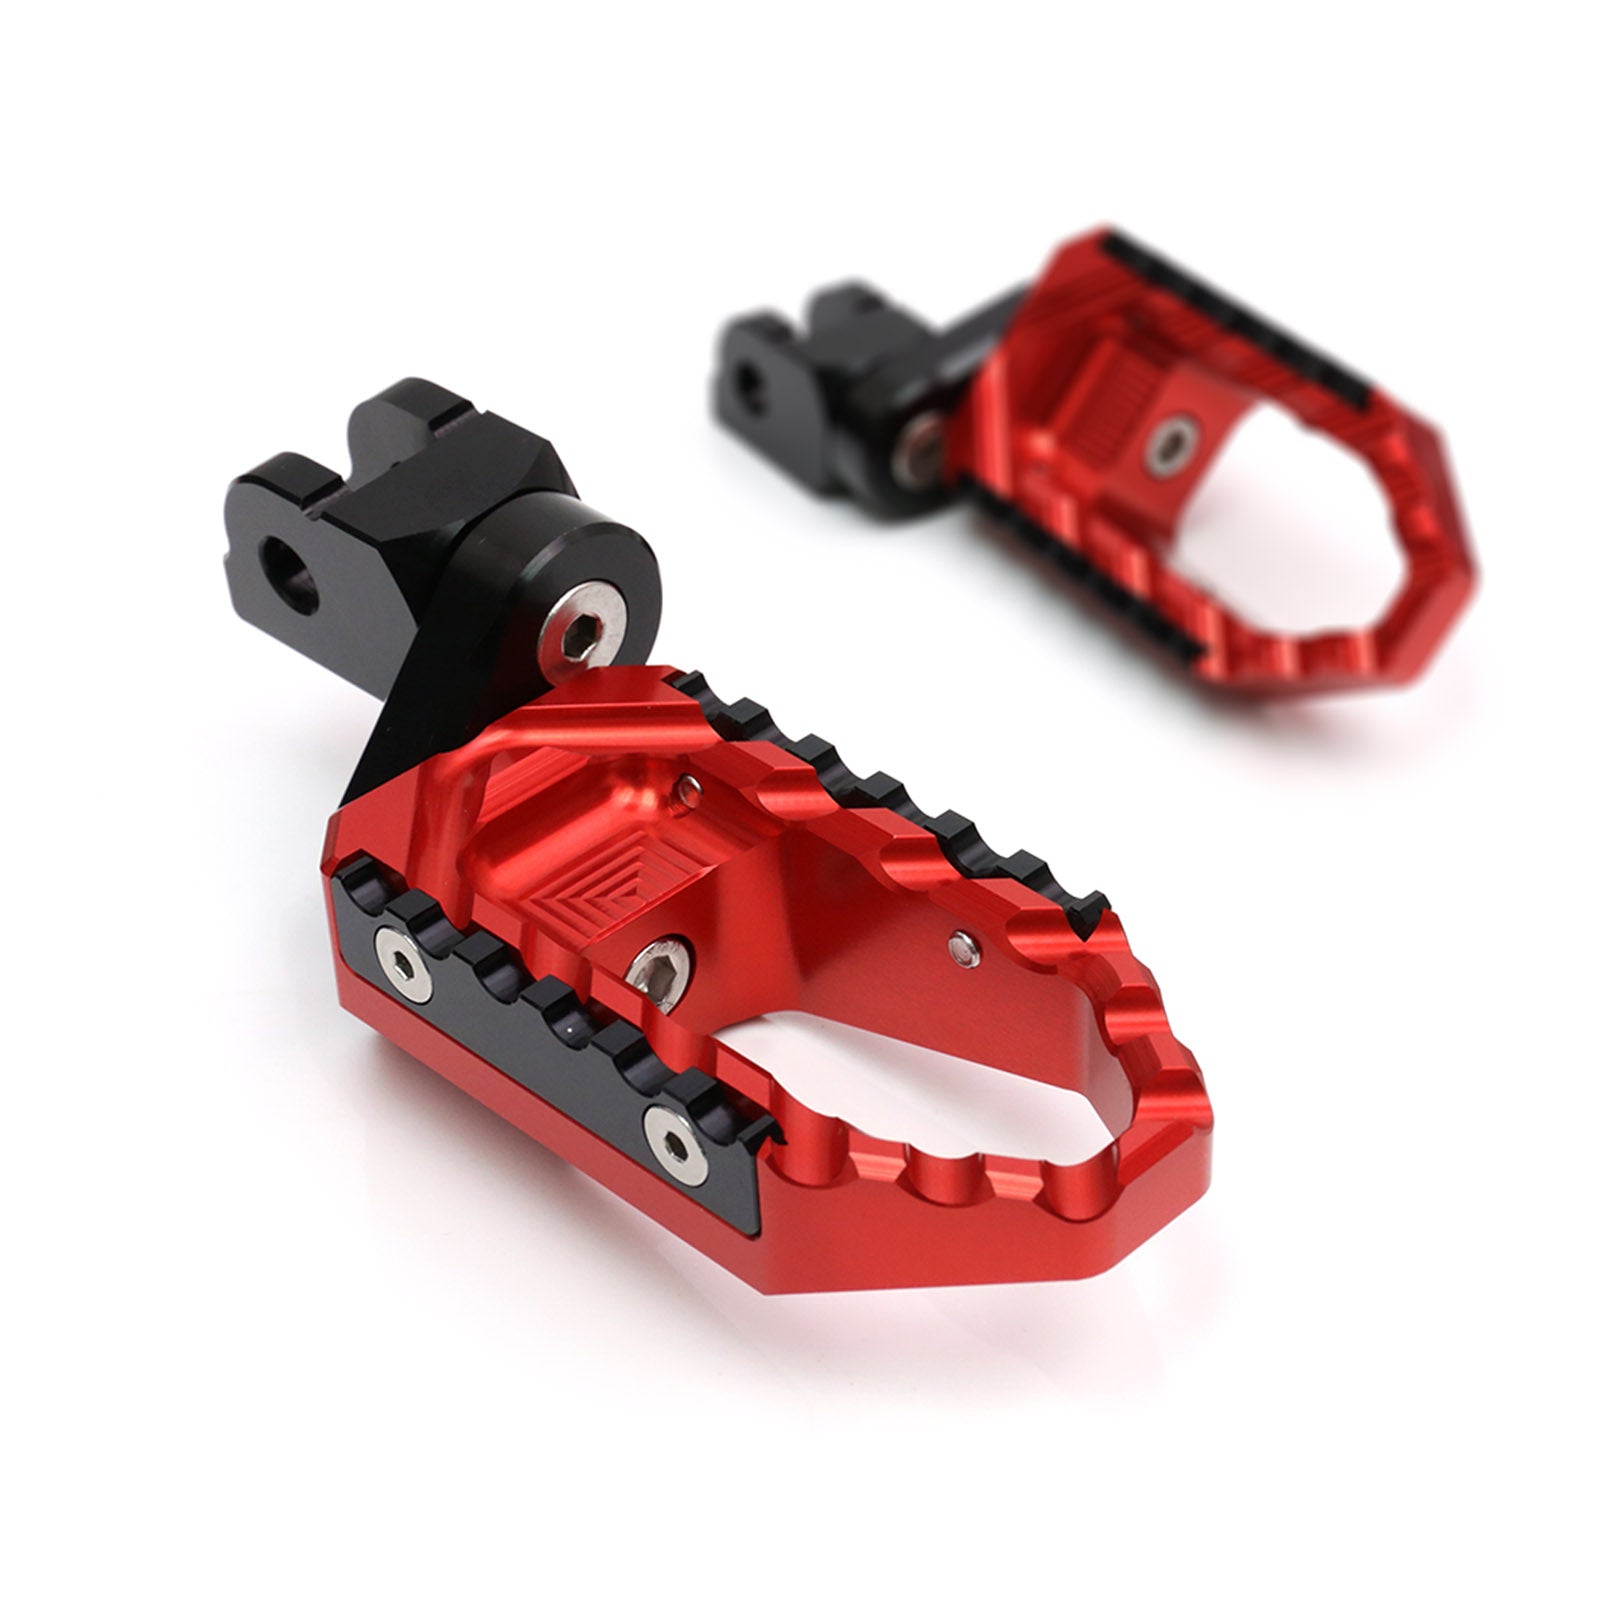 Fit Ducati 1199 Panigale Front Touring 25mm Multi-Step Foot Pegs - MC Motoparts